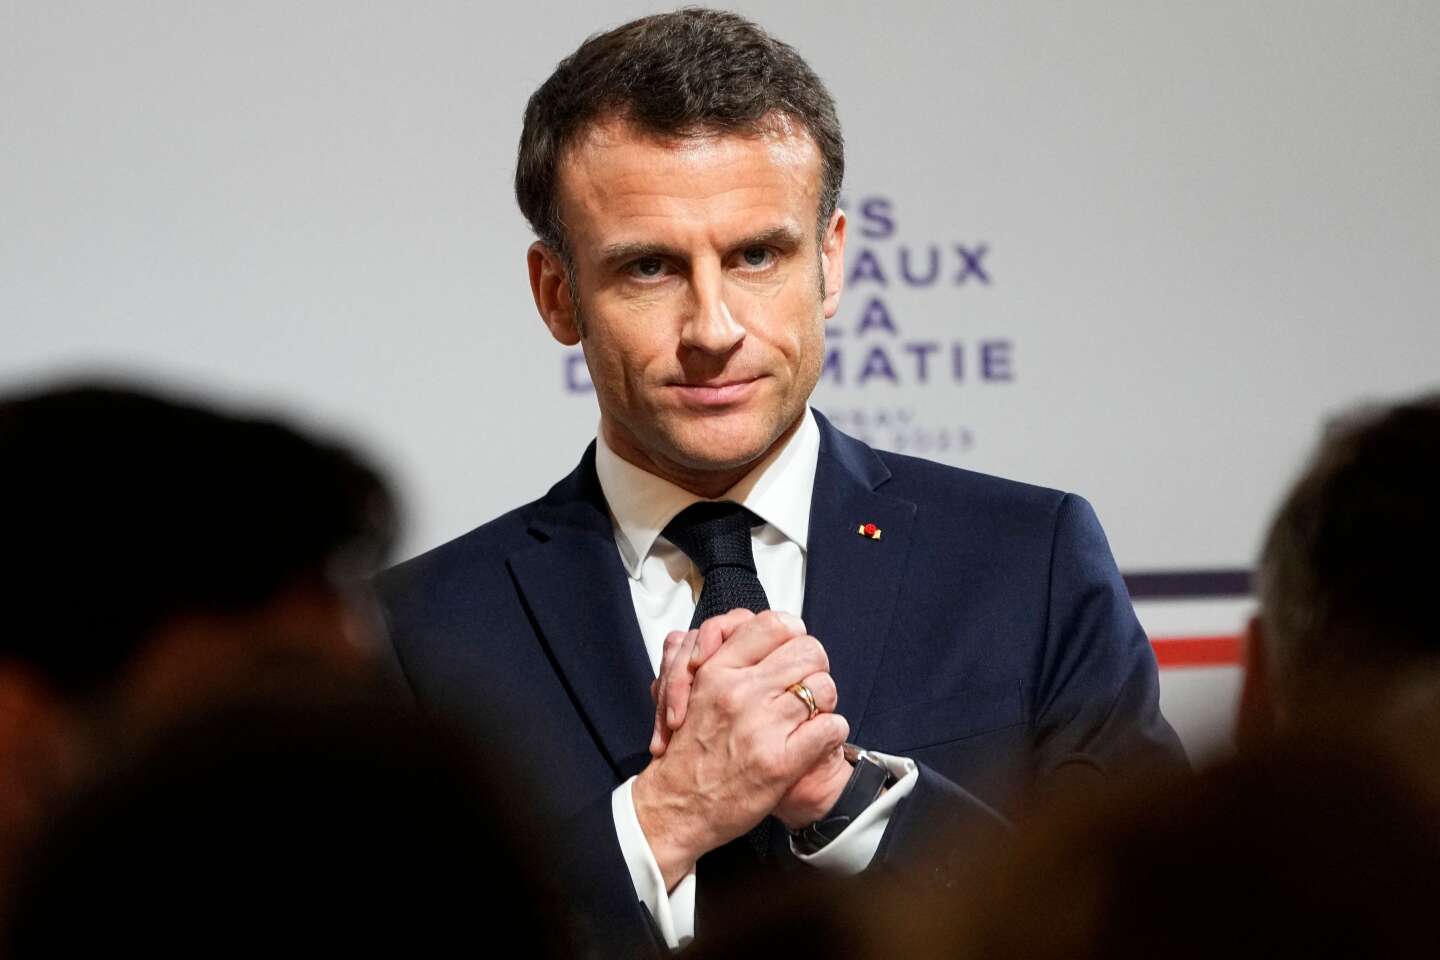 Macron invokes “too great financial risks” to justify 49.3